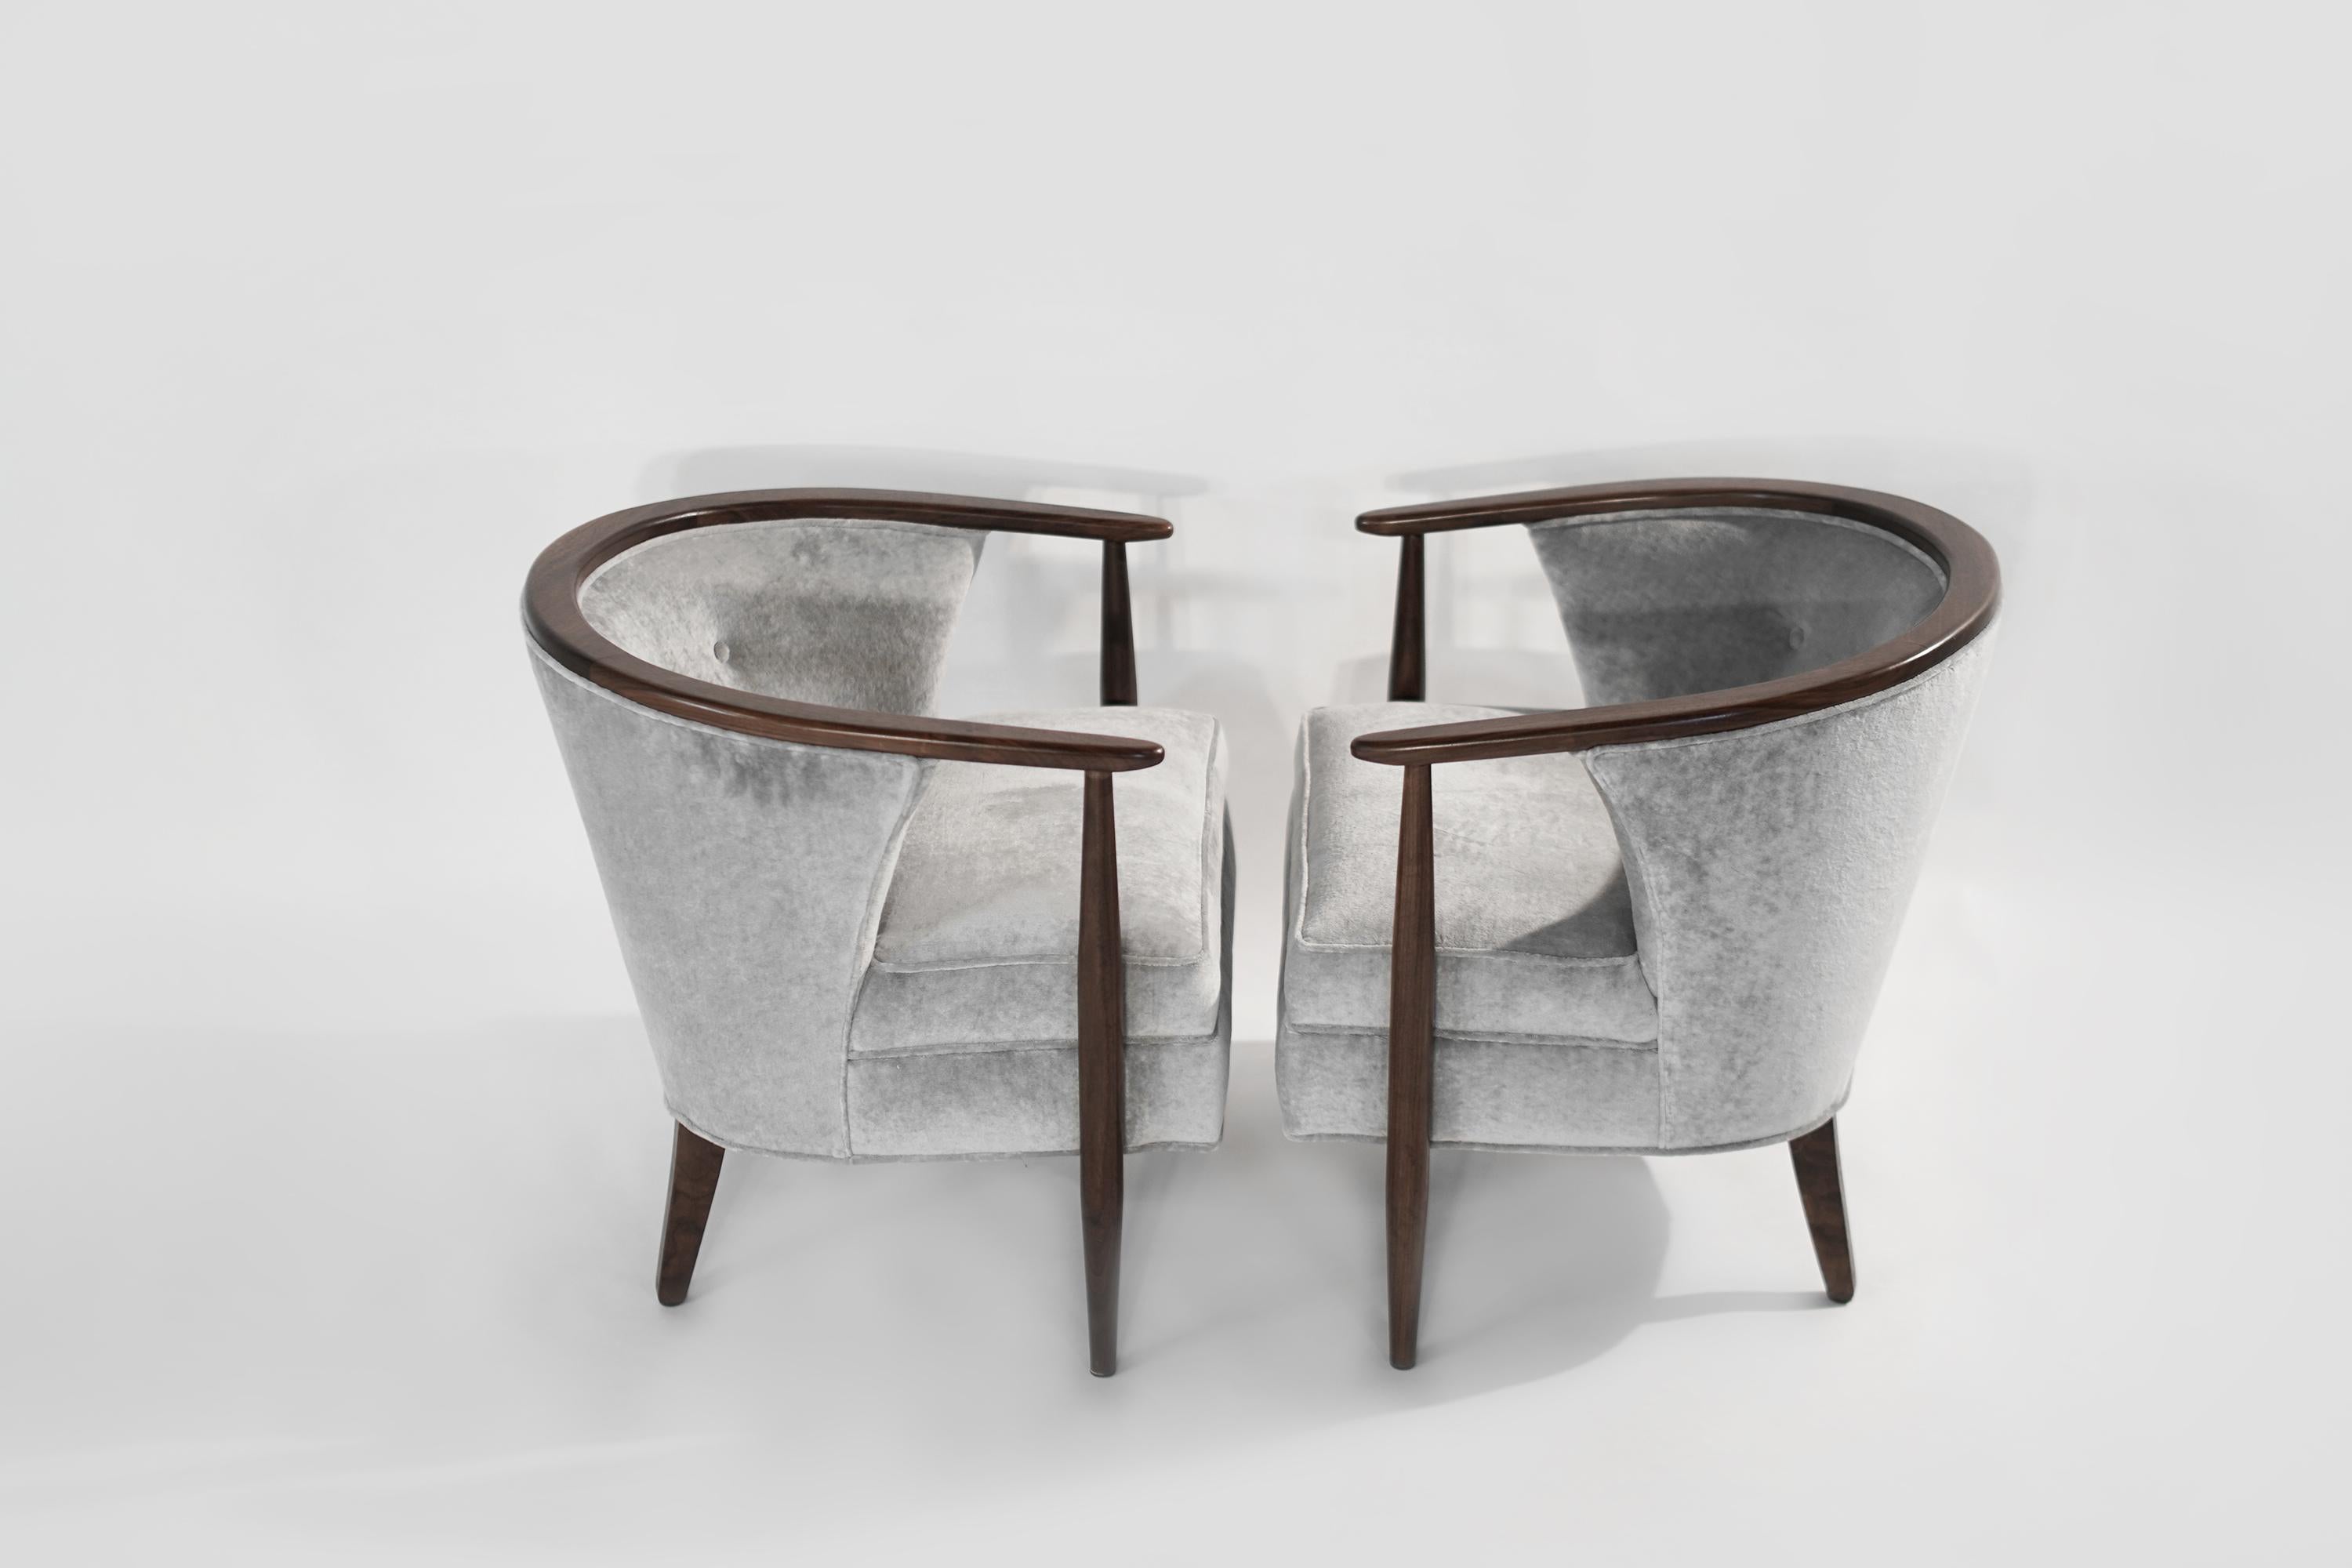 Pair of Scandinavian lounge chairs, newly upholstered in distressed grey linen velvet by Holly Hunt. Exposed walnut framework fully restored. 
Other designers of the period include, Finn Juhl, Kaare Klint, Hans Wegner, Gio Ponti, and Poul Kjaerholm.